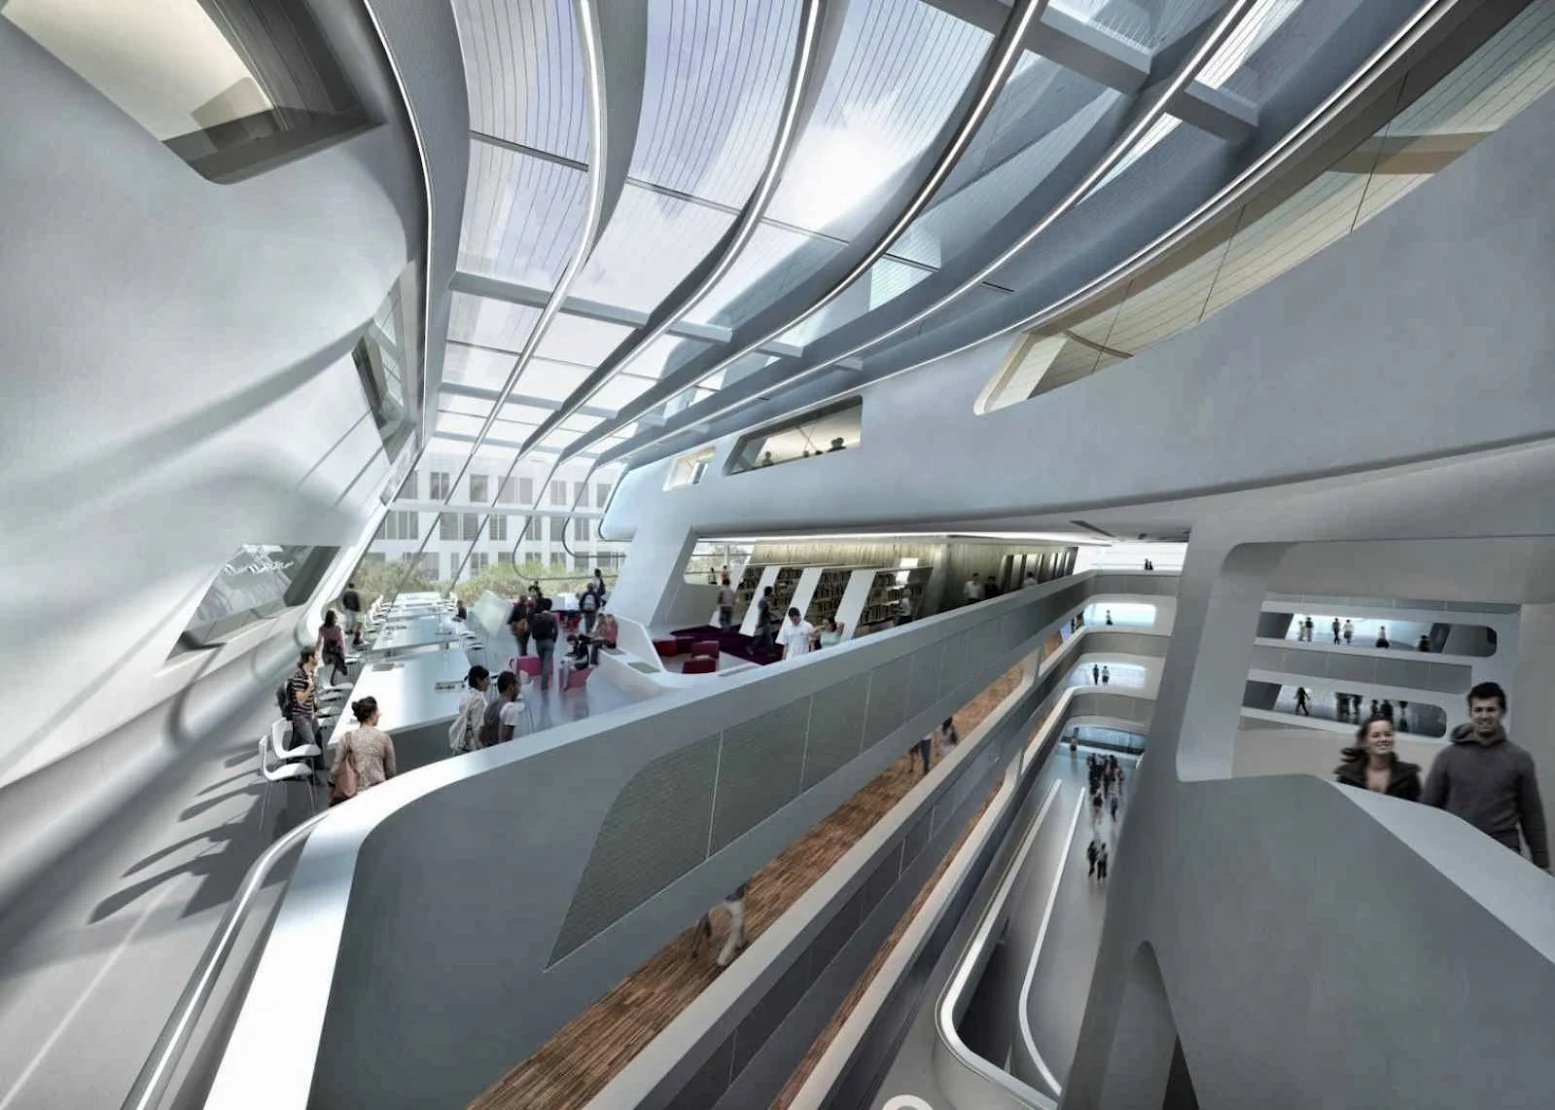 Library and Learning Center by Zaha Hadid Architects